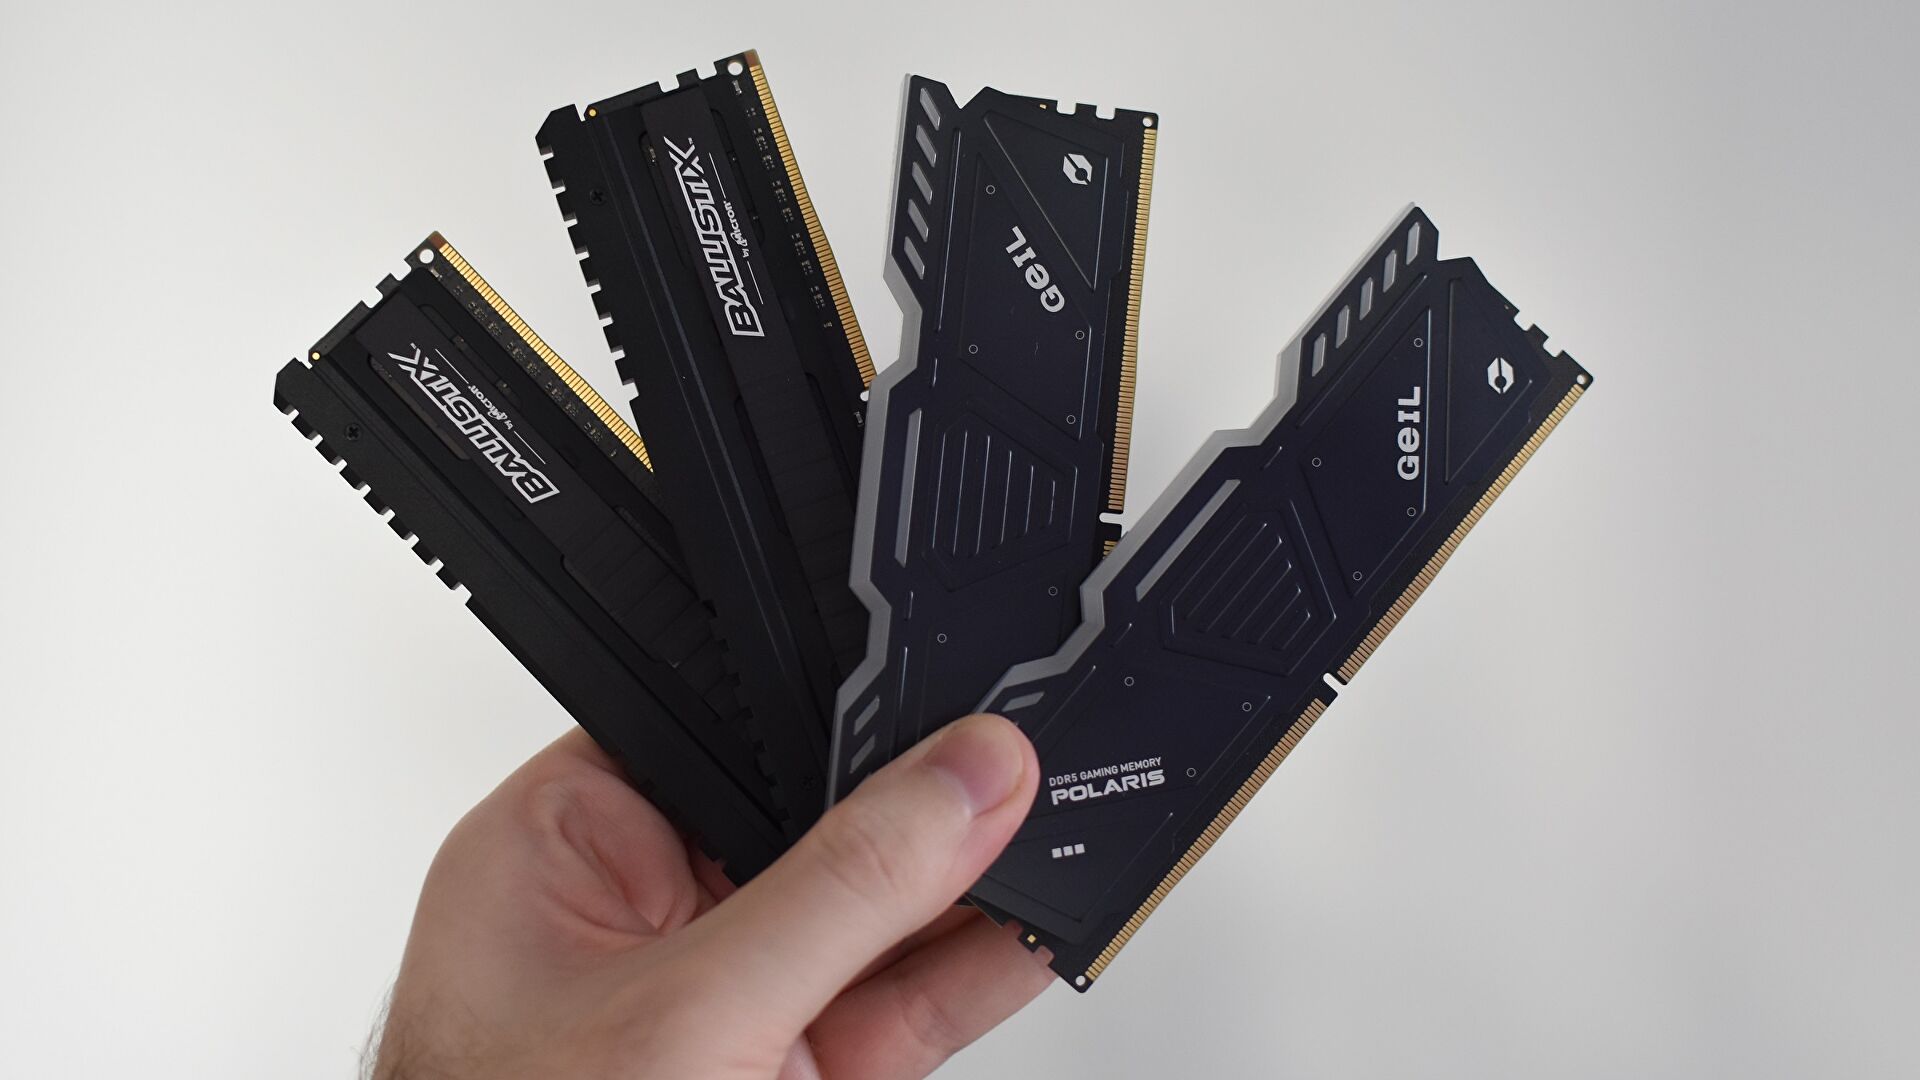 Pick up 16GB of Crucial DDR5-4800 RAM for under £90